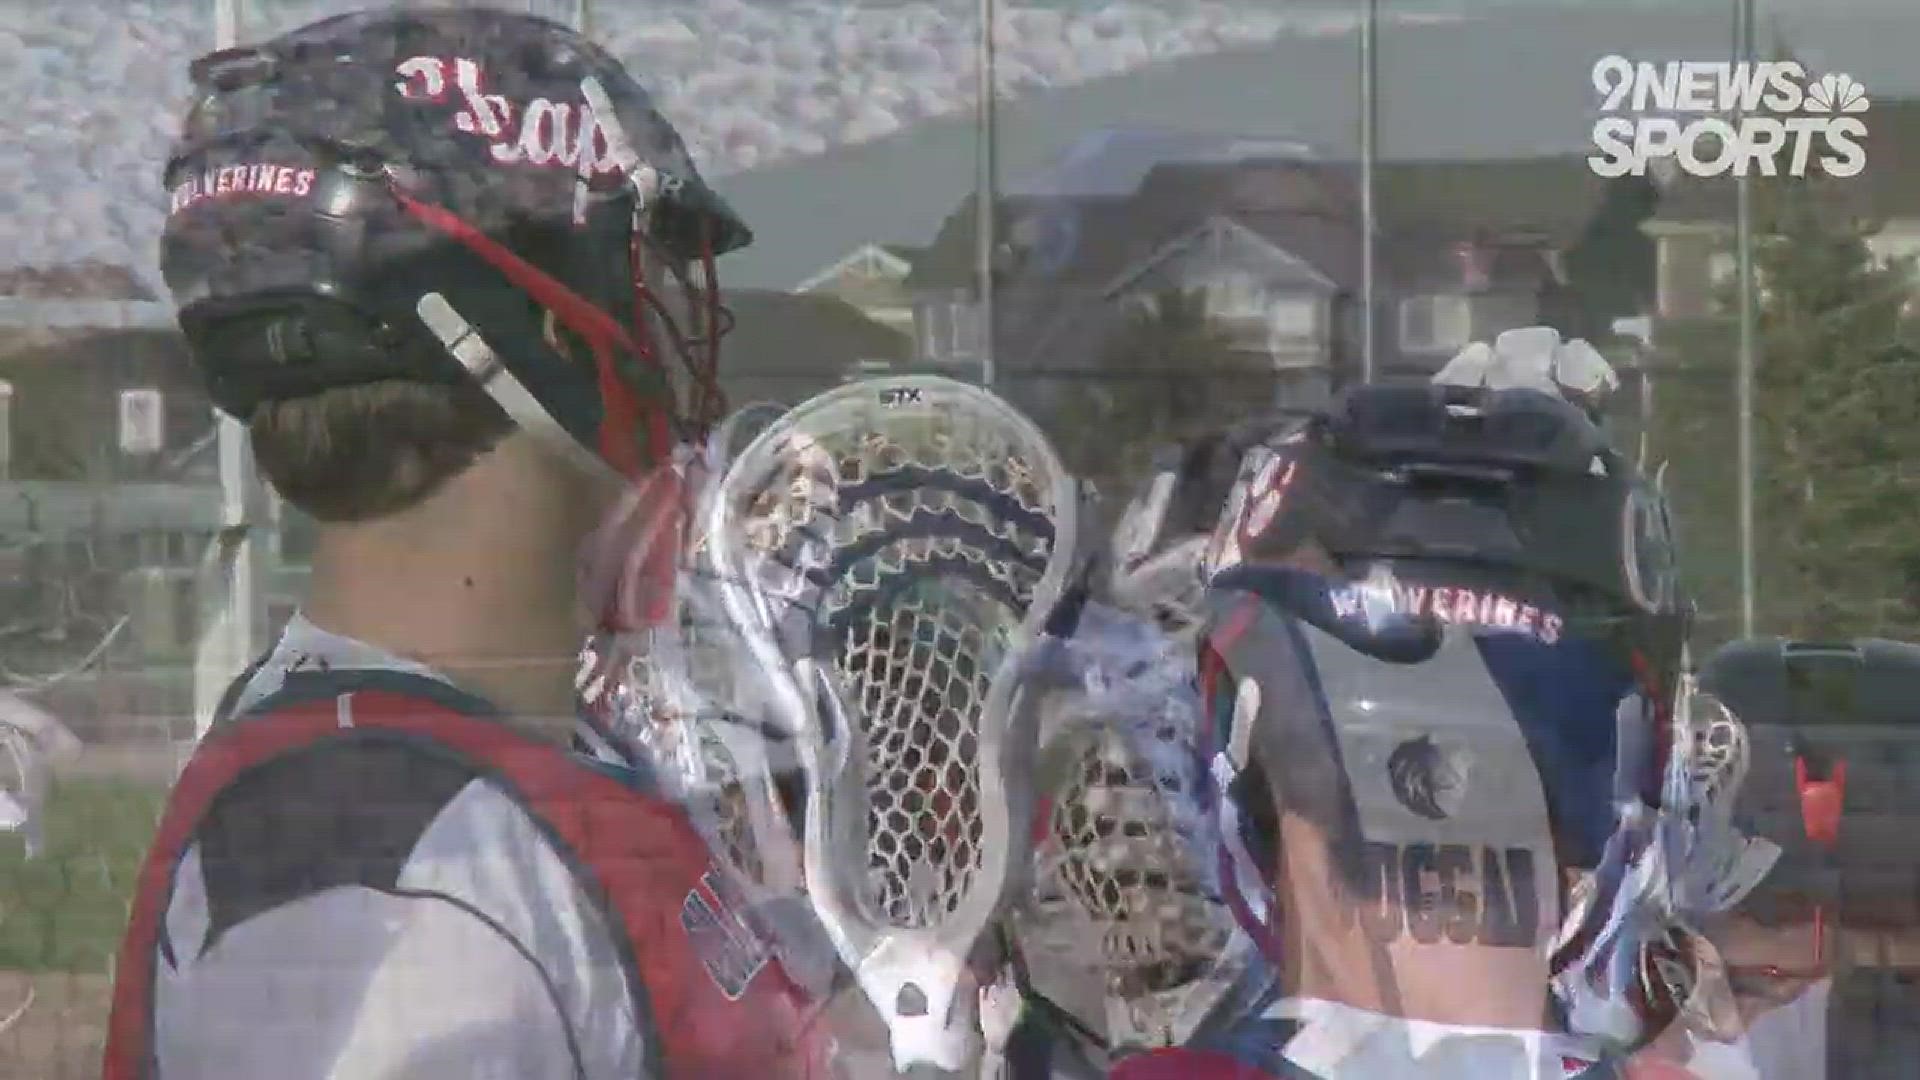 The Grandview Wolves outscored the Chaparral Wolverines 7-3 in the second half for early upset in 5A lacrosse.